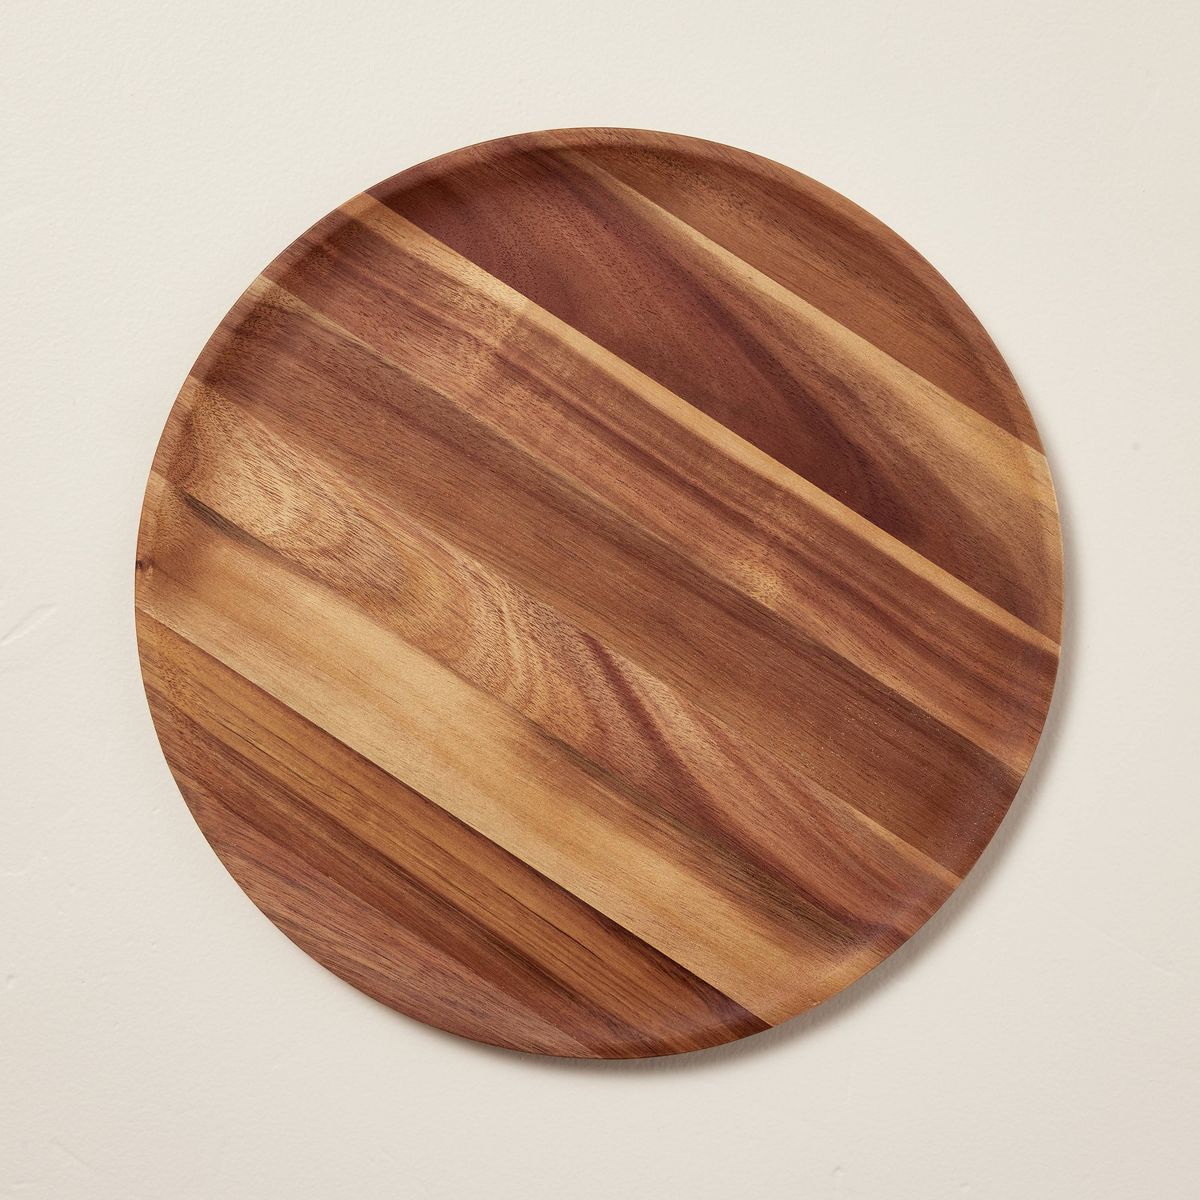 13" Wooden Plate Charger Brown - Hearth & Hand™ with Magnolia | Target